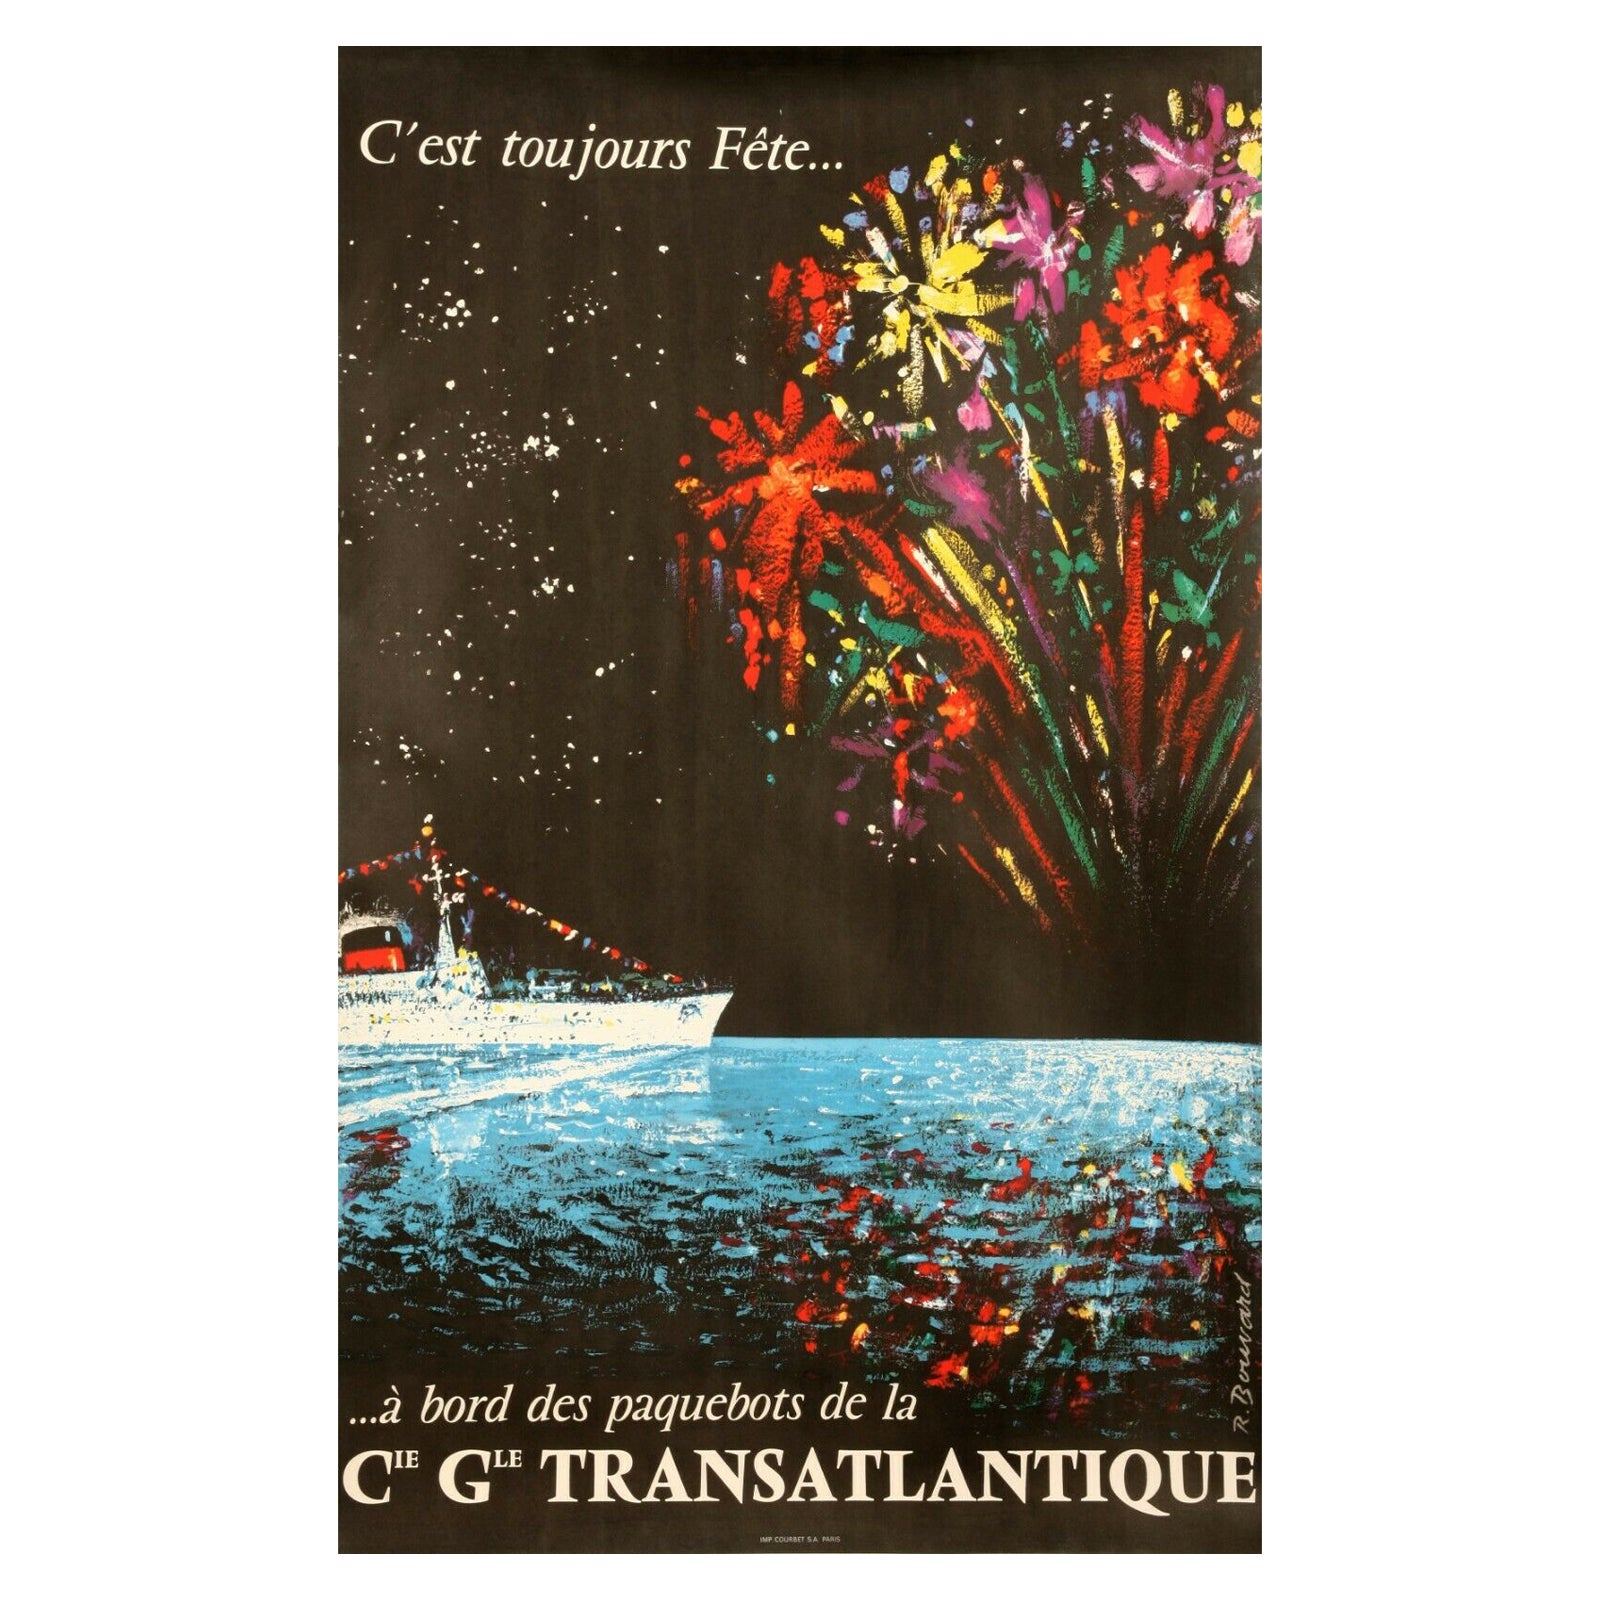 1950s Vintage Poster-Bouvard-At Sea-Cruise Ship-Fireworks Party, 1956